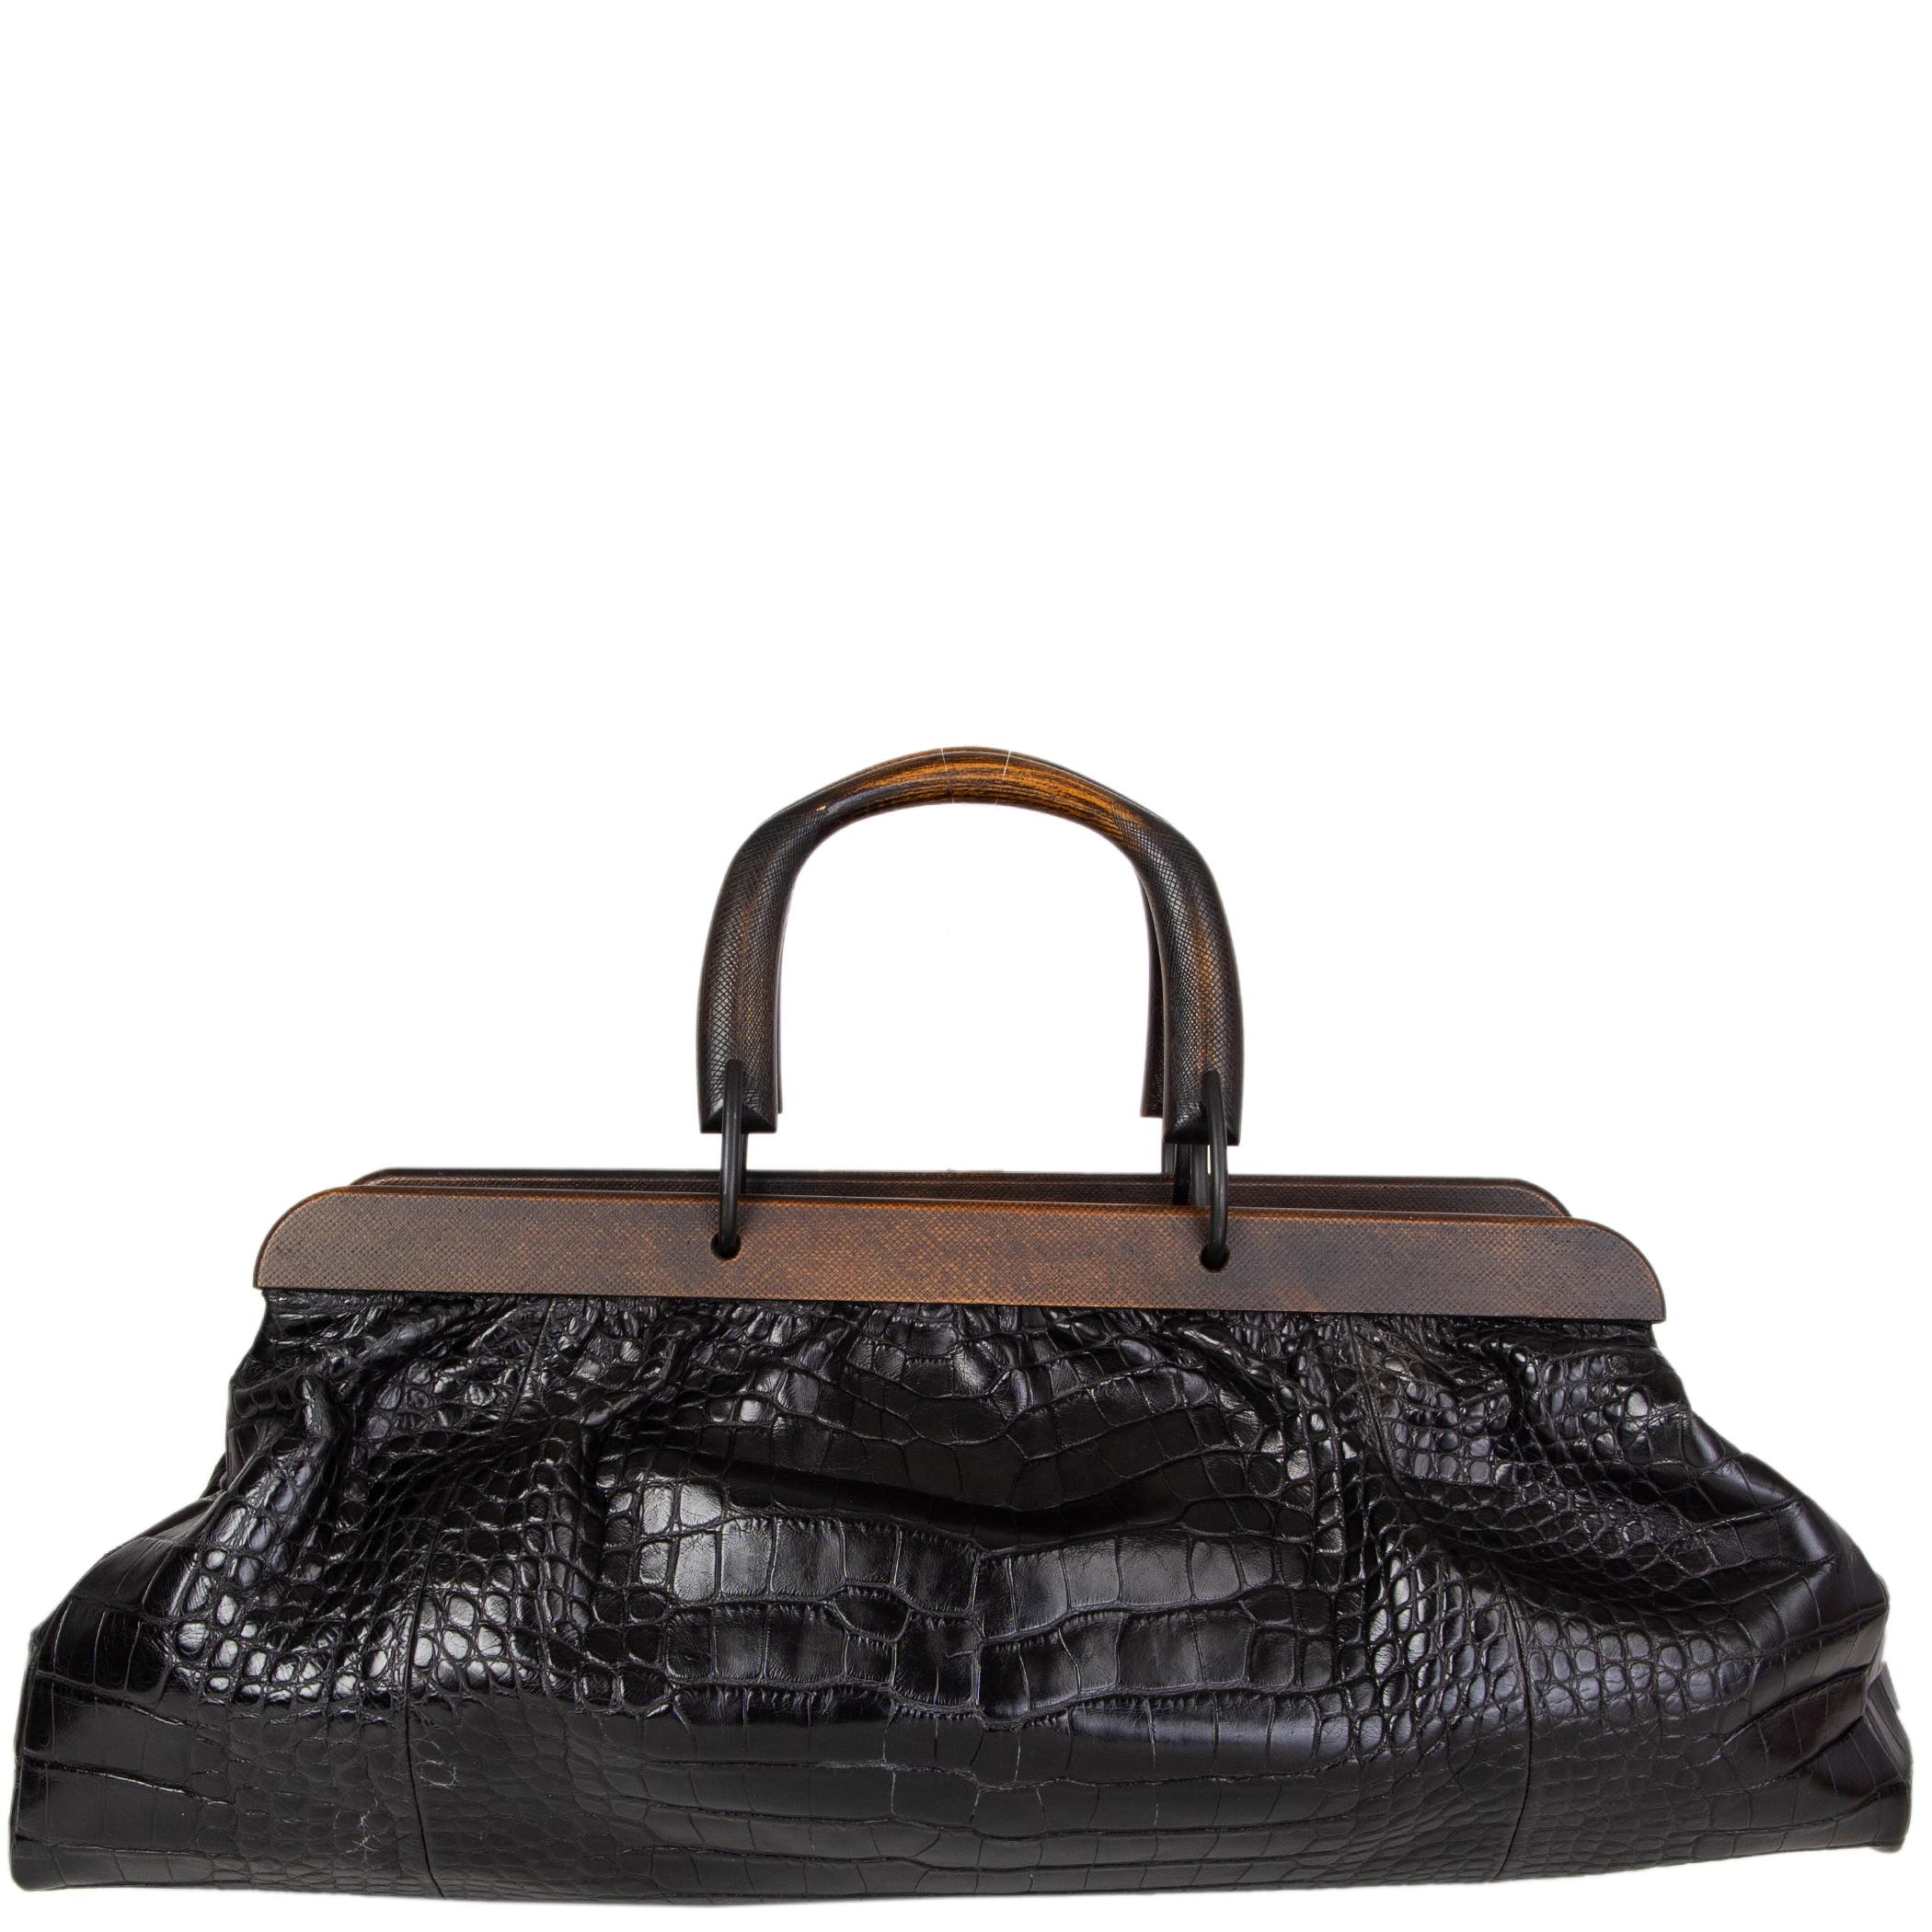 black gucci bag with wooden handle